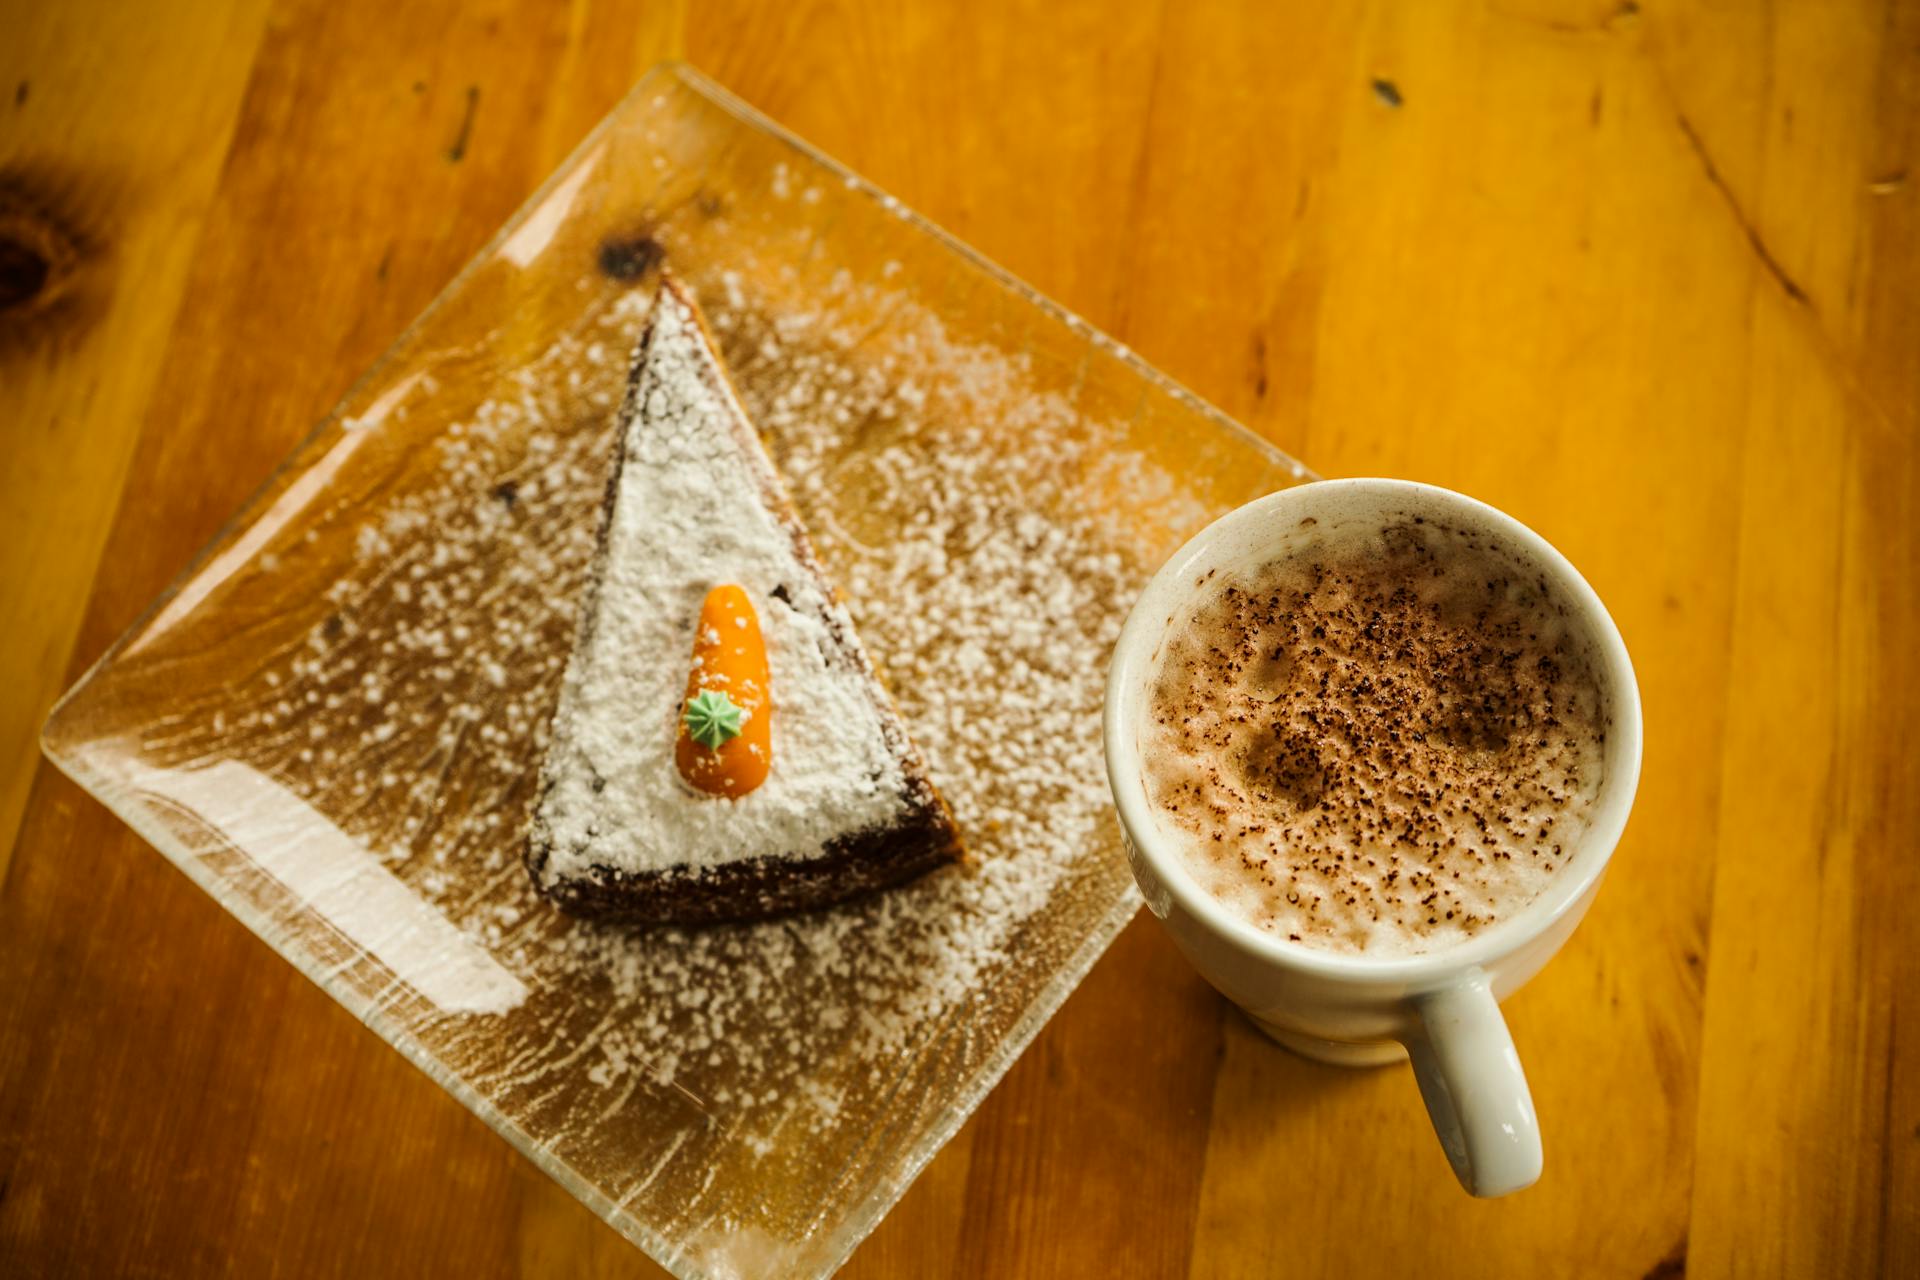 A slice of cake and a cup of coffee | Source: Pexels